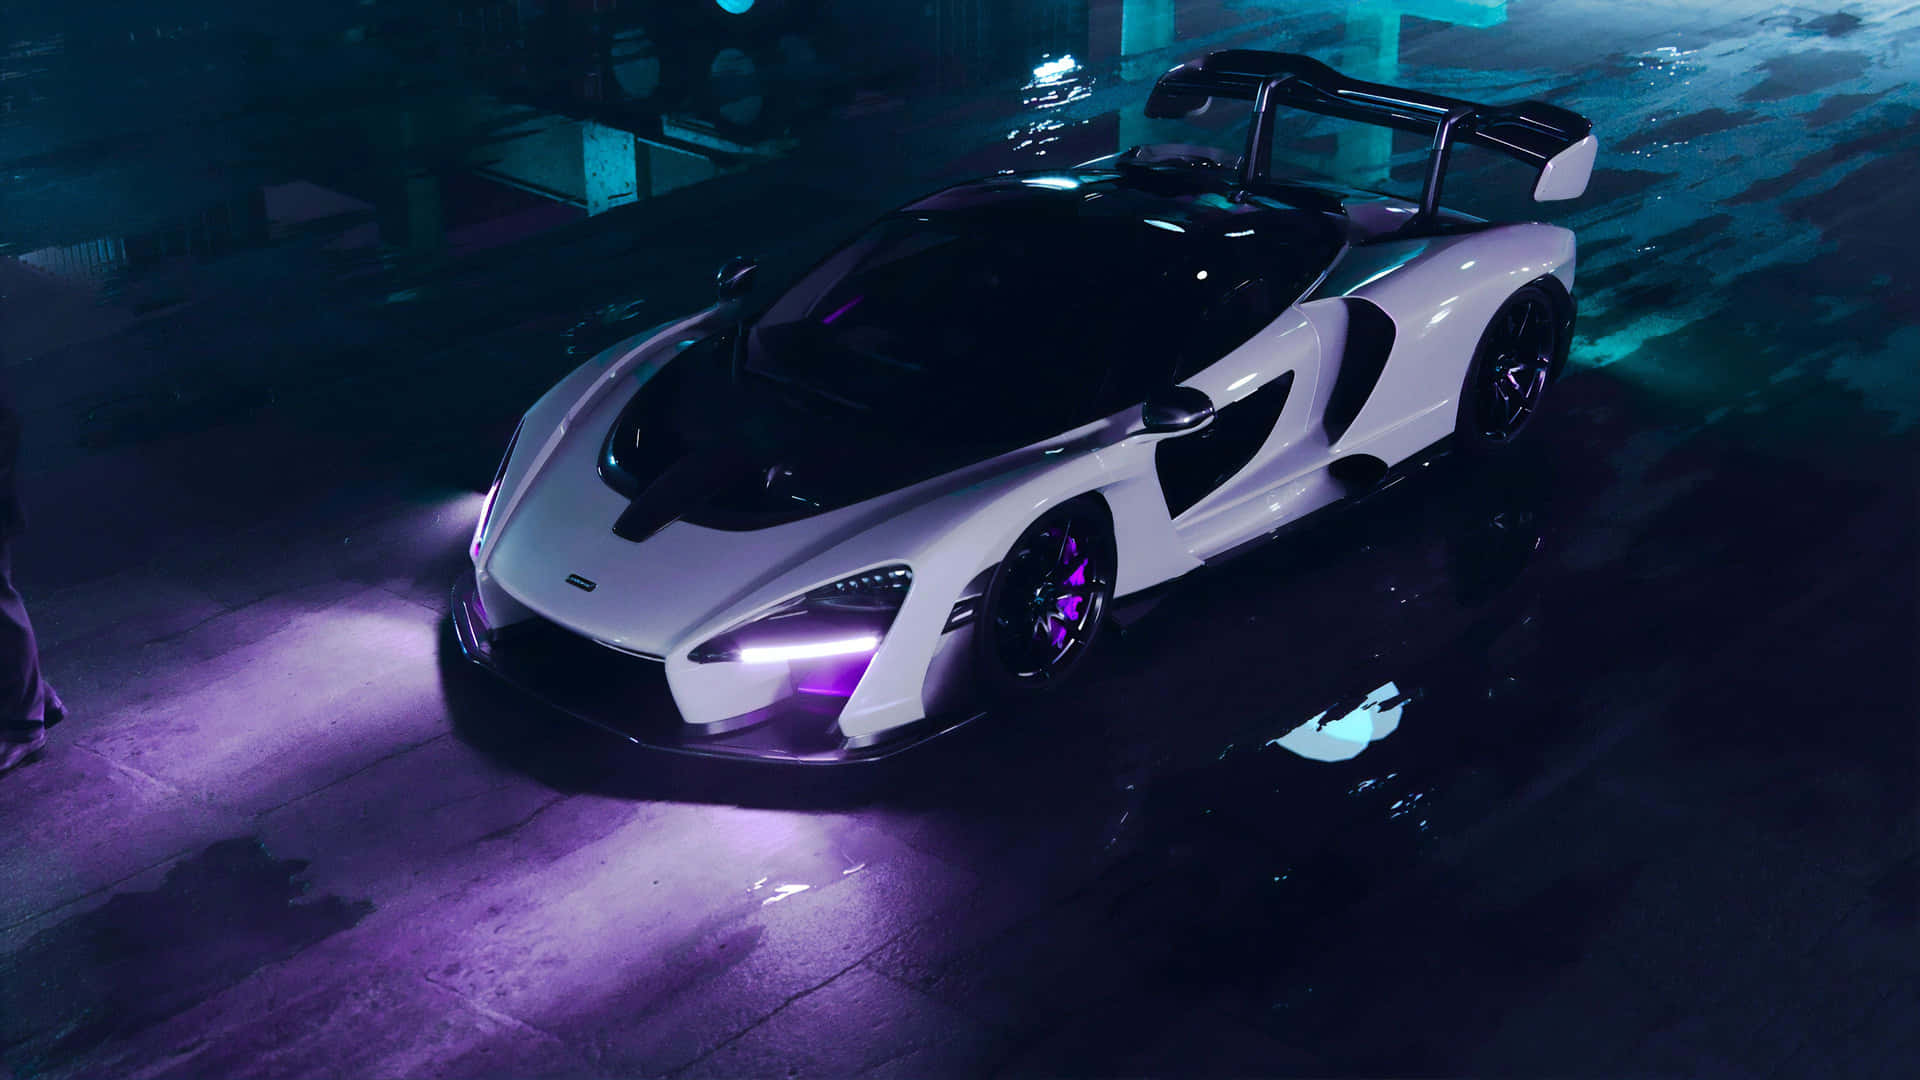 A White And Purple Sports Car Is Parked In A Dark Parking Lot Wallpaper